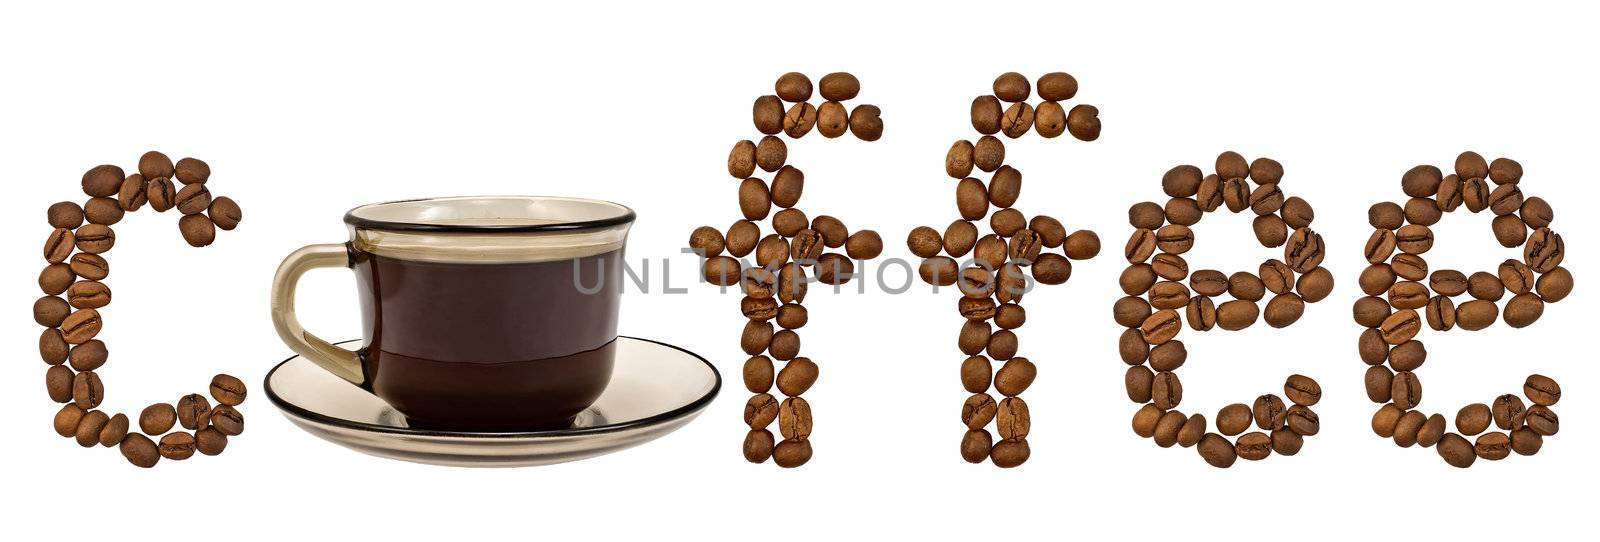 Word of coffee beans with a cup of coffee from a brown glass isolated on white background